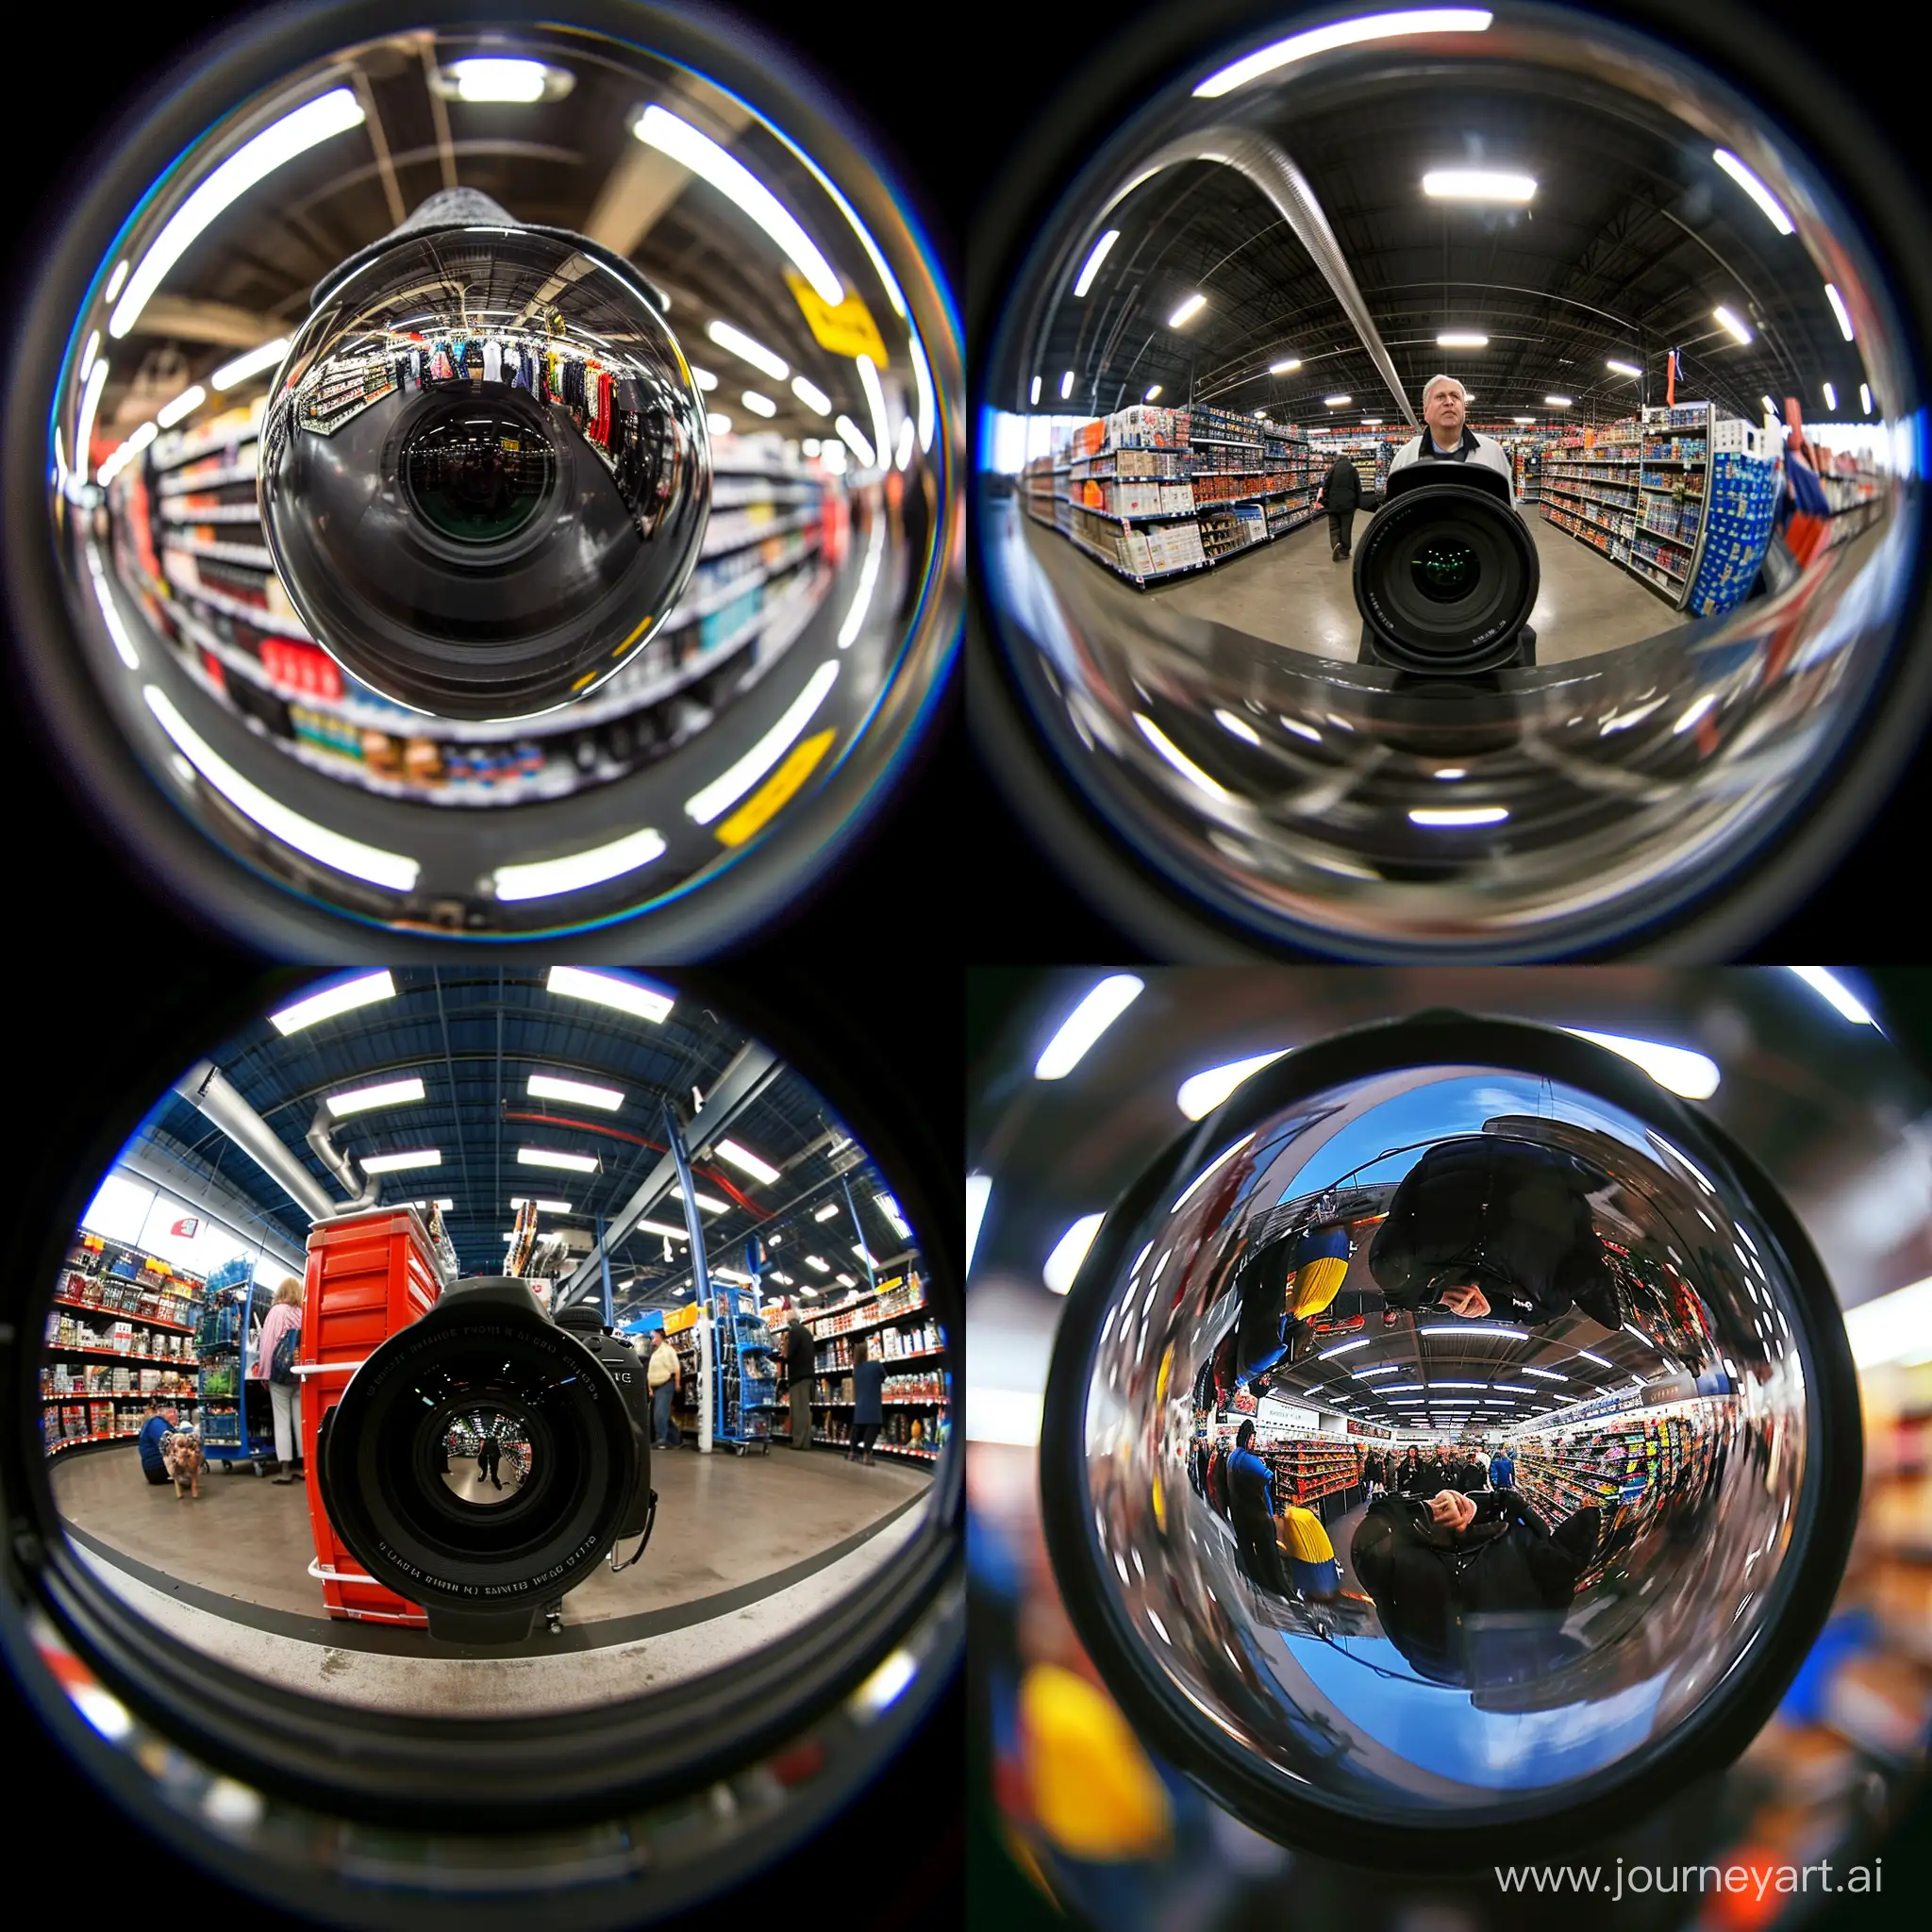 Black Friday in the store, from the camera's lapel, fisheye style